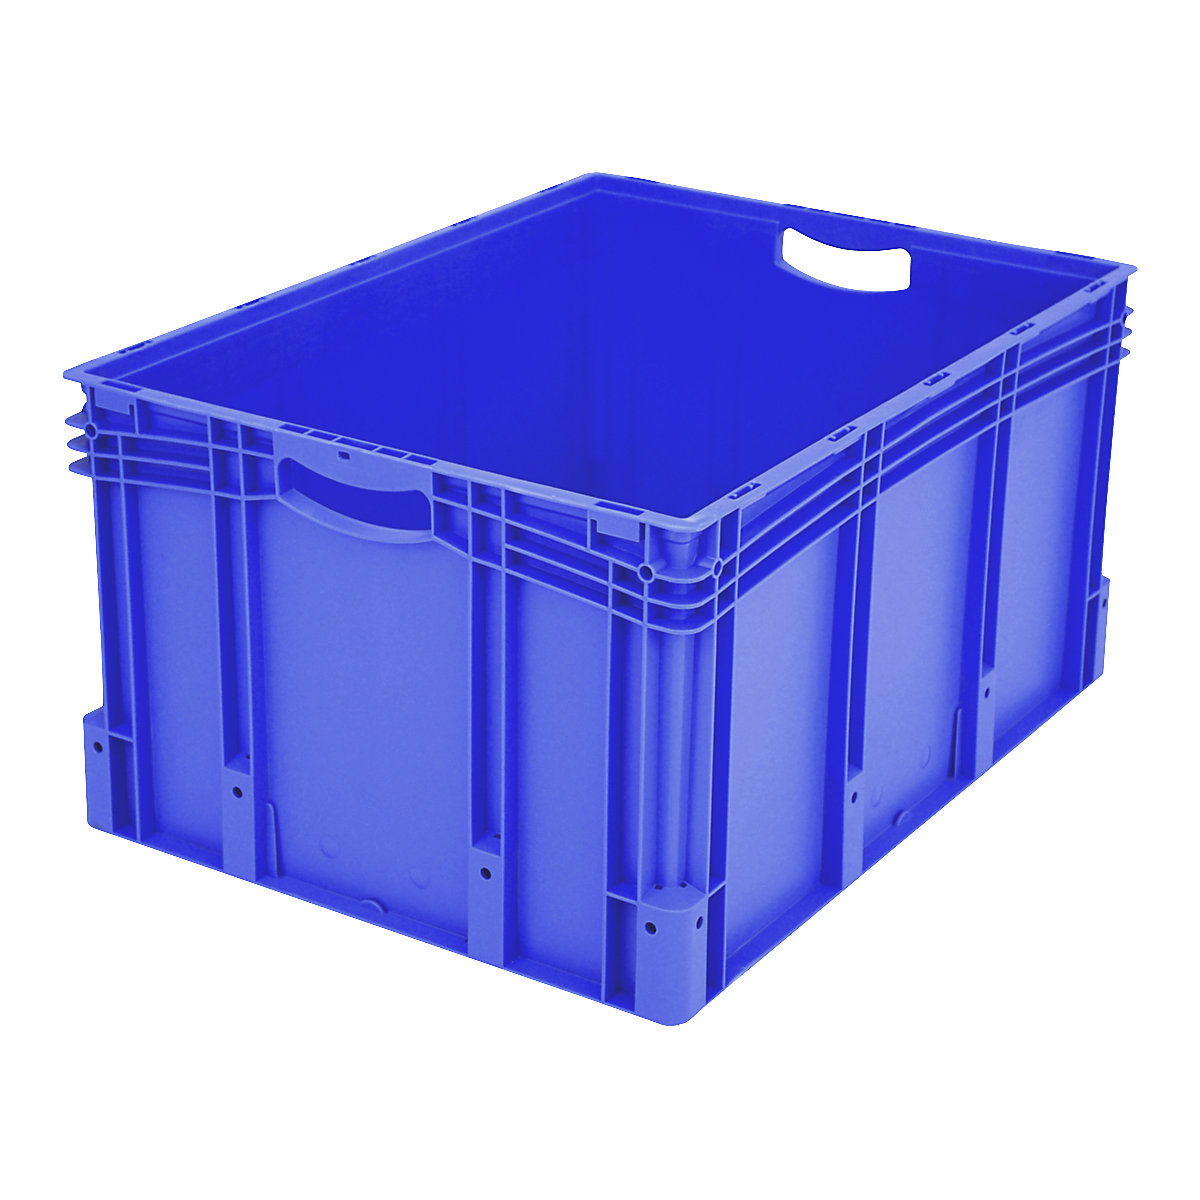 XL Euro stacking container – BITO, standard model, LxWxH 800 x 600 x 420 mm-13